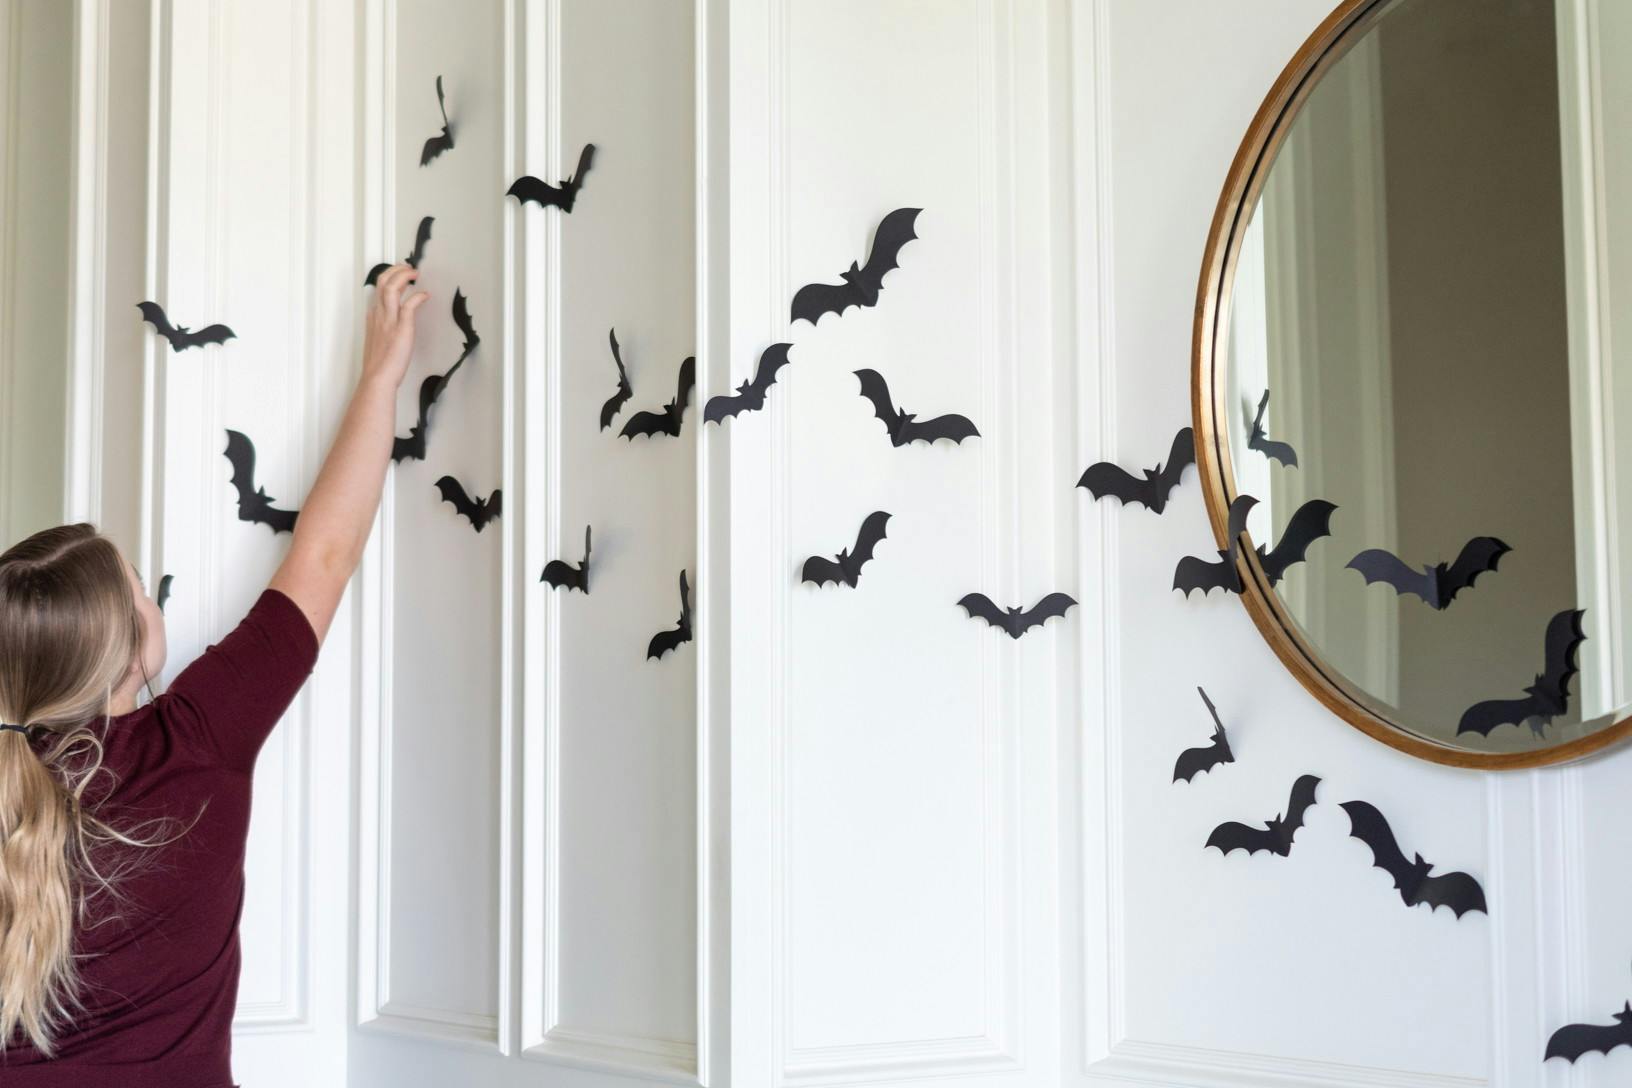 A woman attaching black paper bats to a wall inside a home